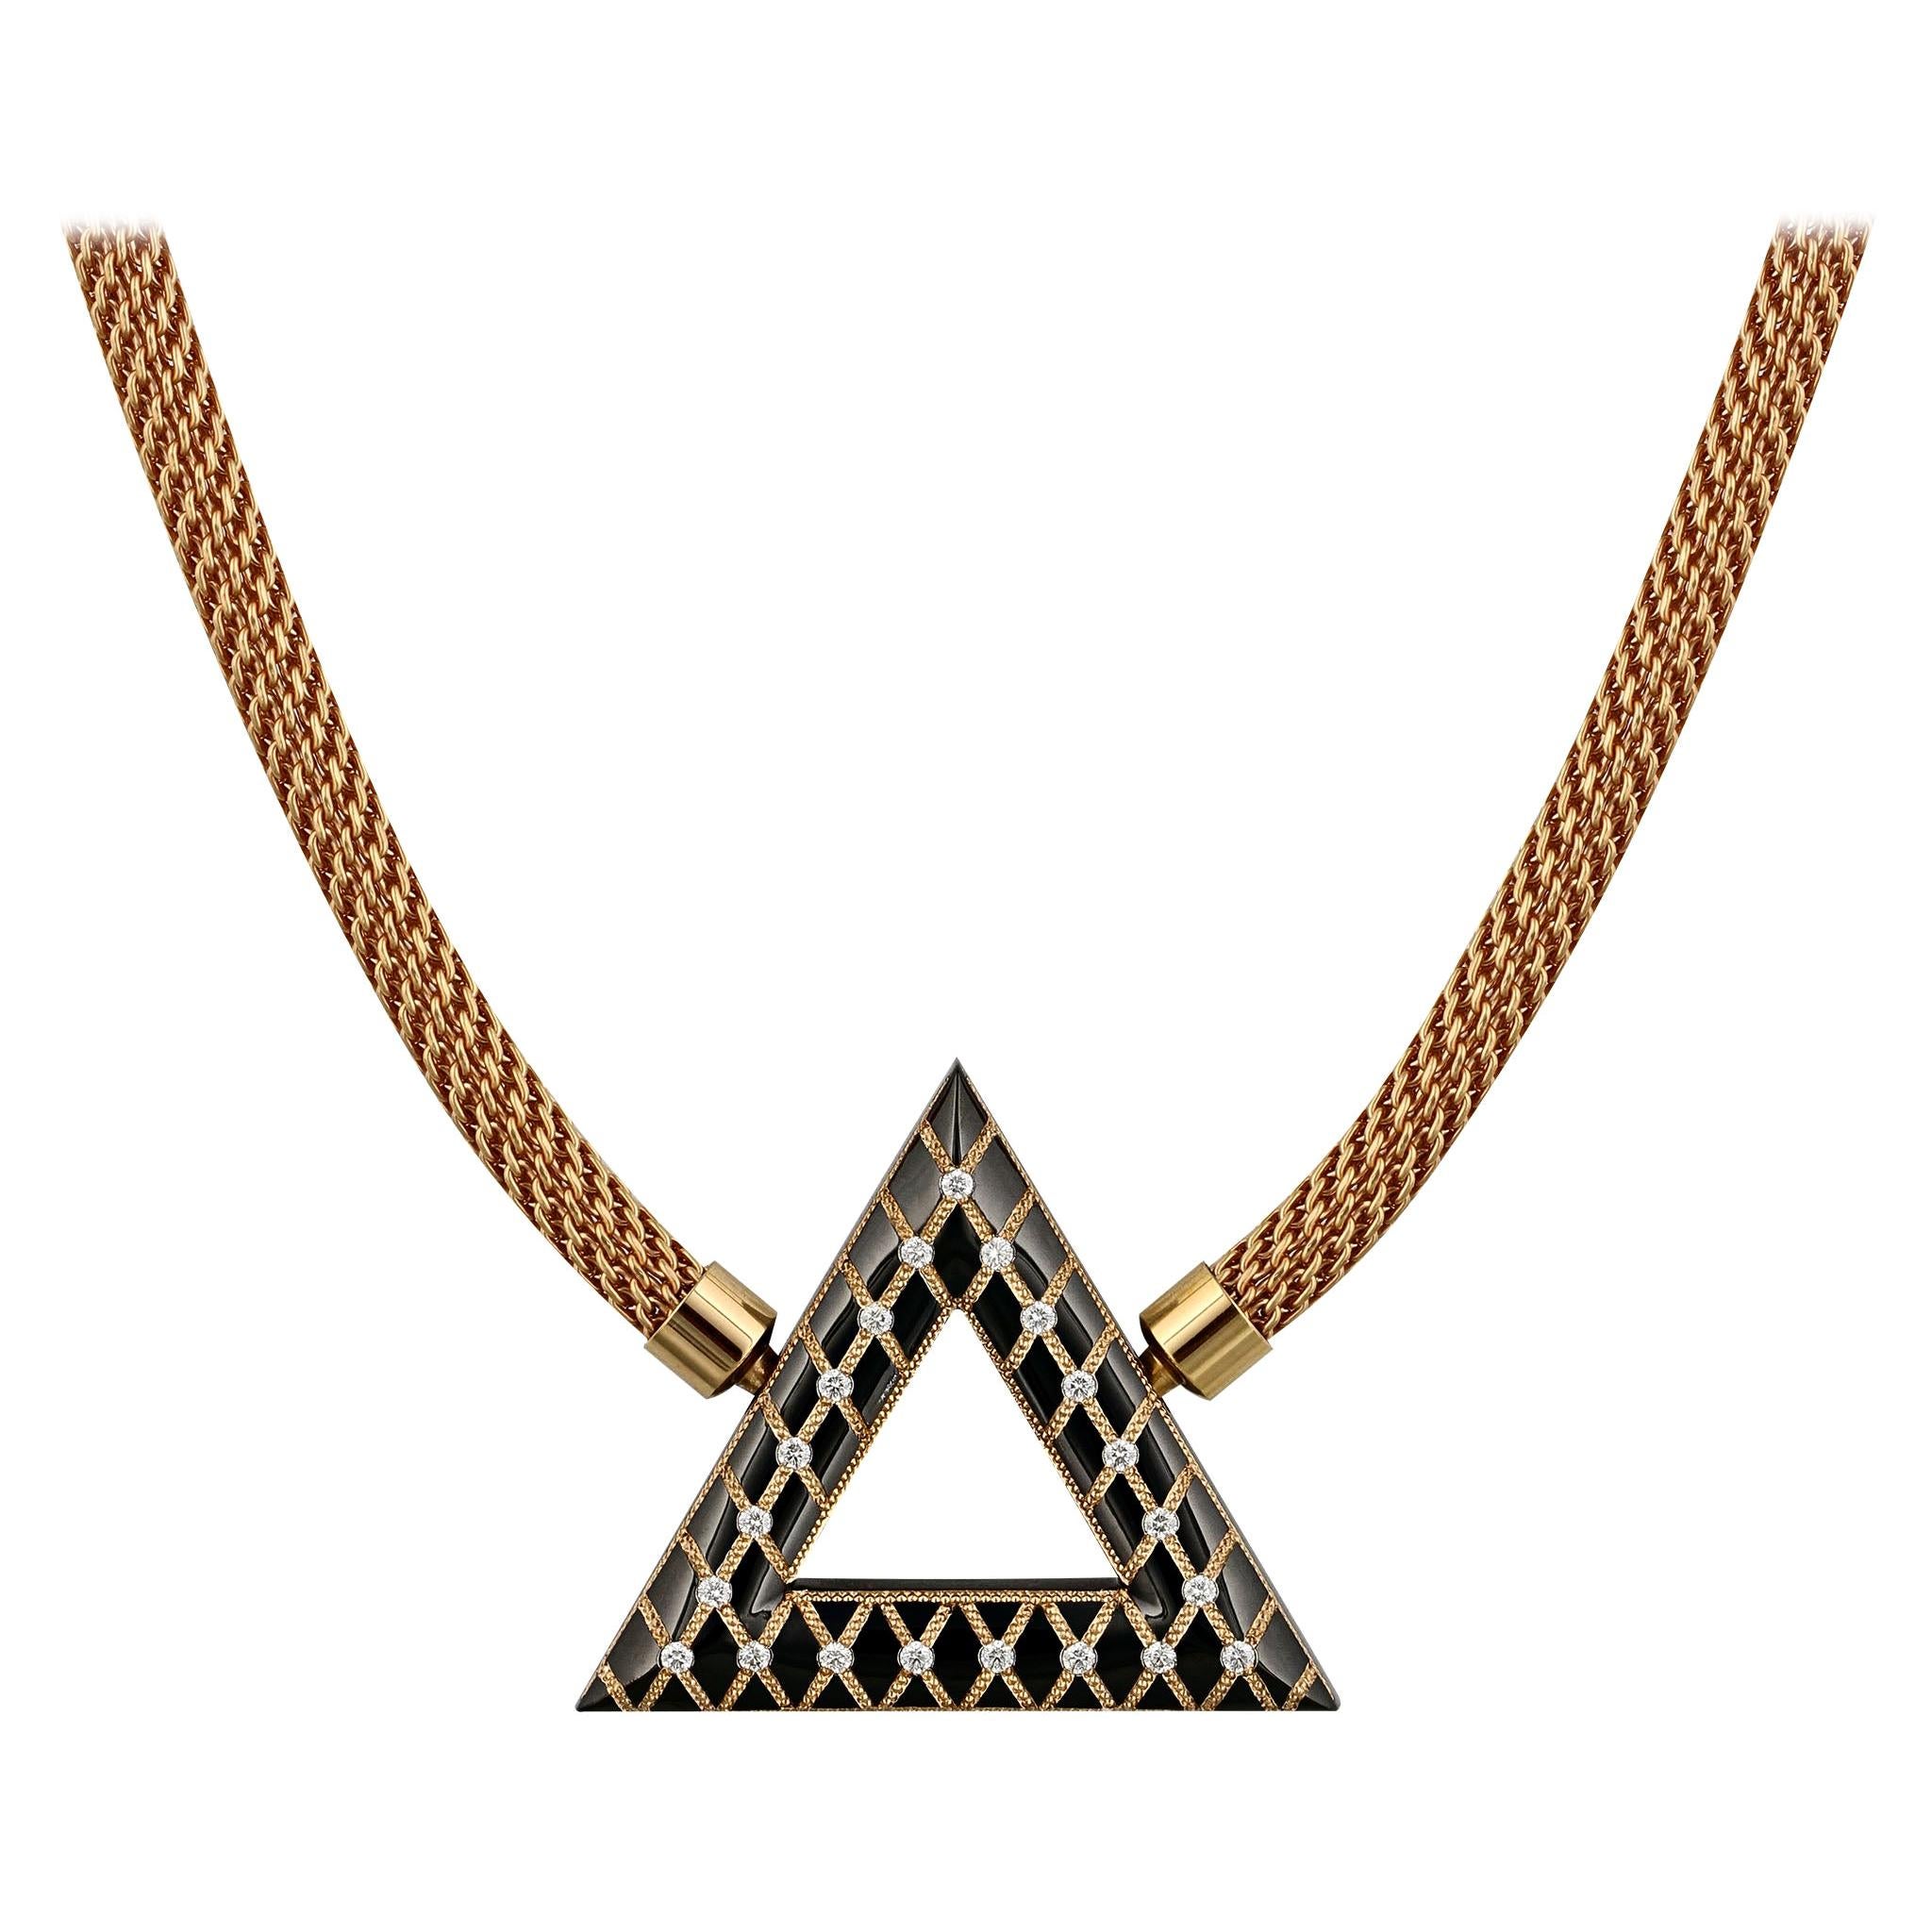 Geometric Pyramid Shaped Rose Gold Inlaid Pendant by Zoltan David For Sale